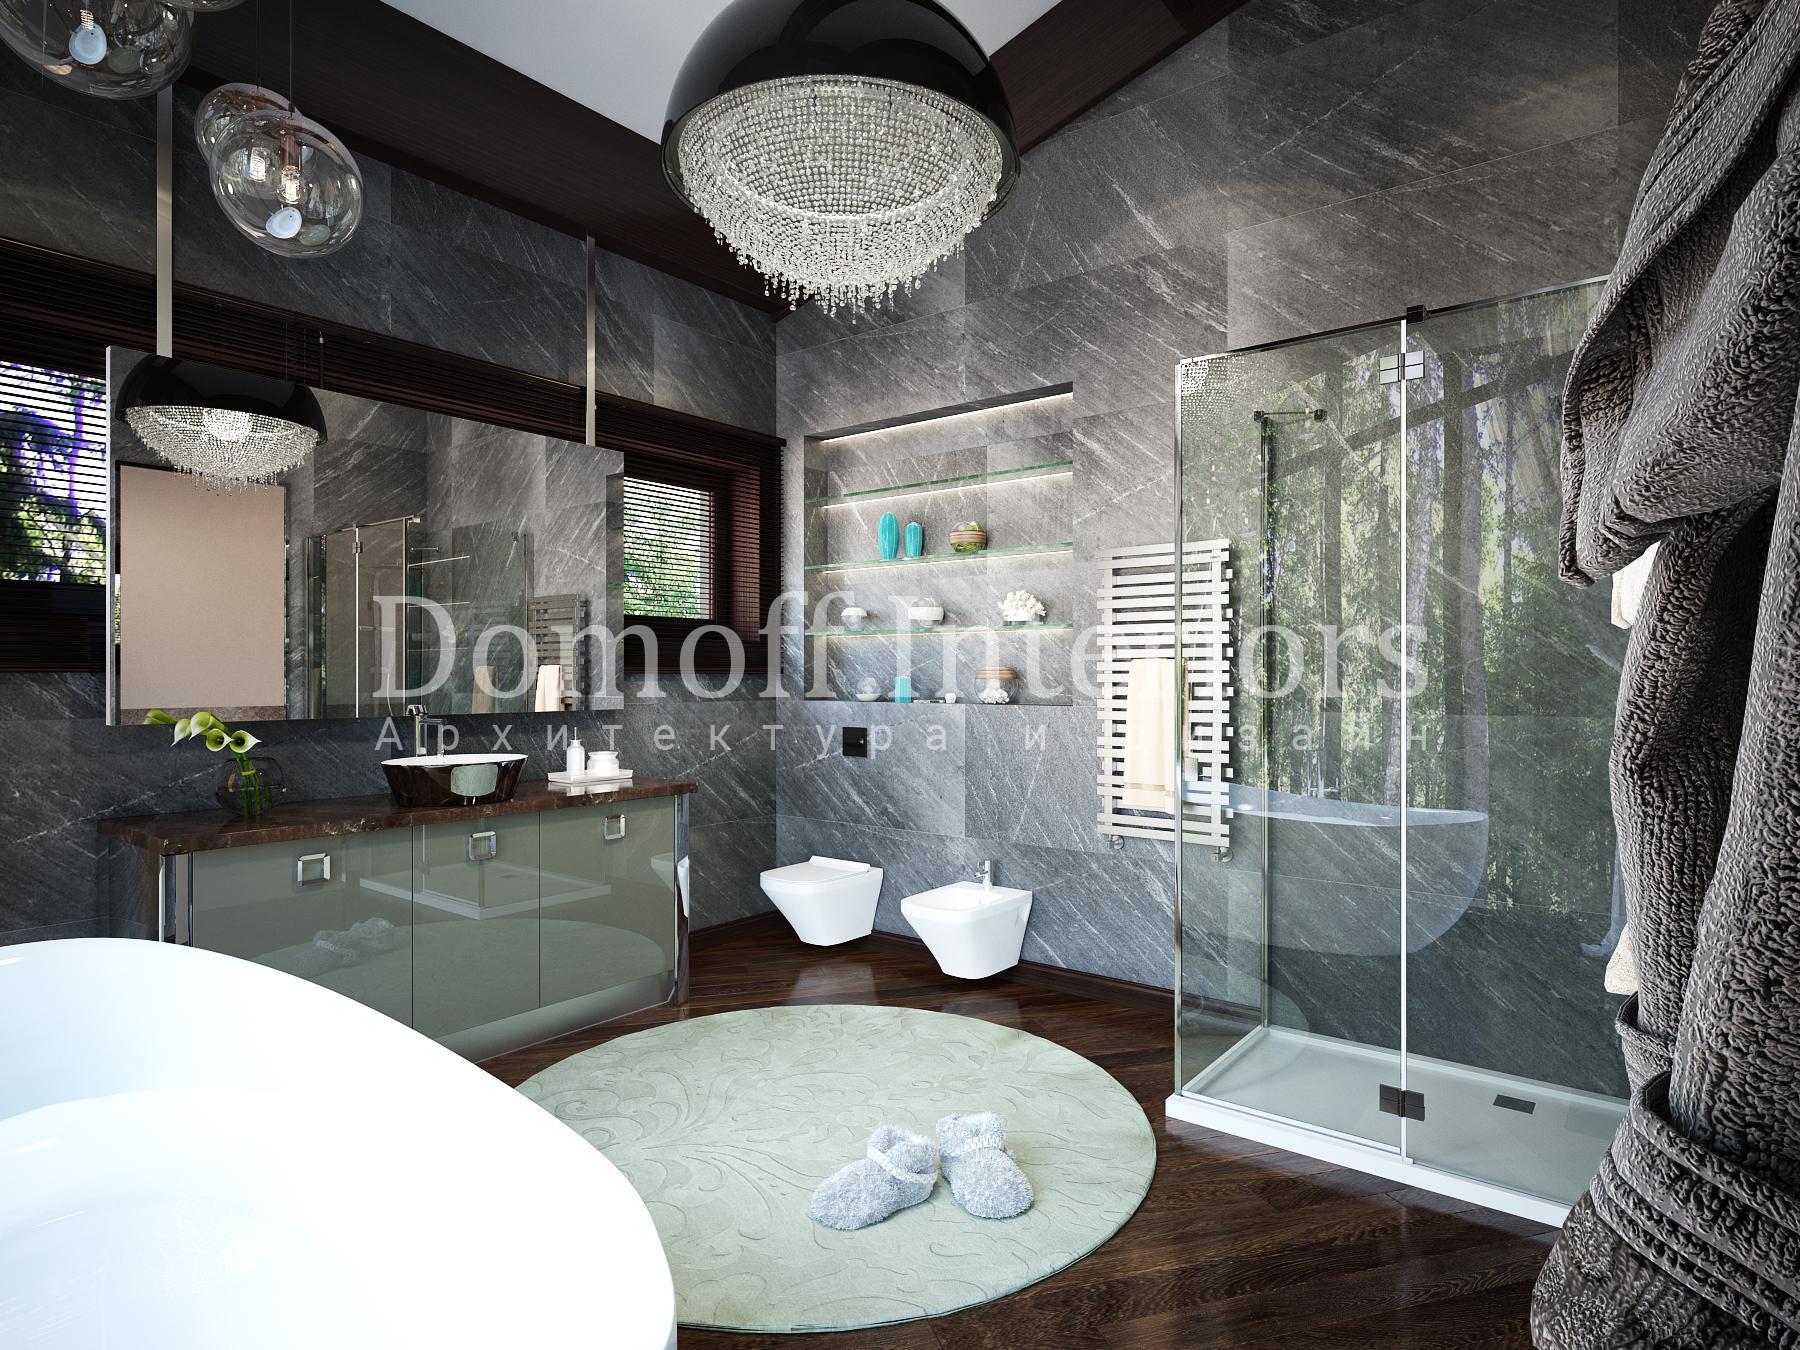 Woman's master bathroom made in the style of Contemporary Eclecticism